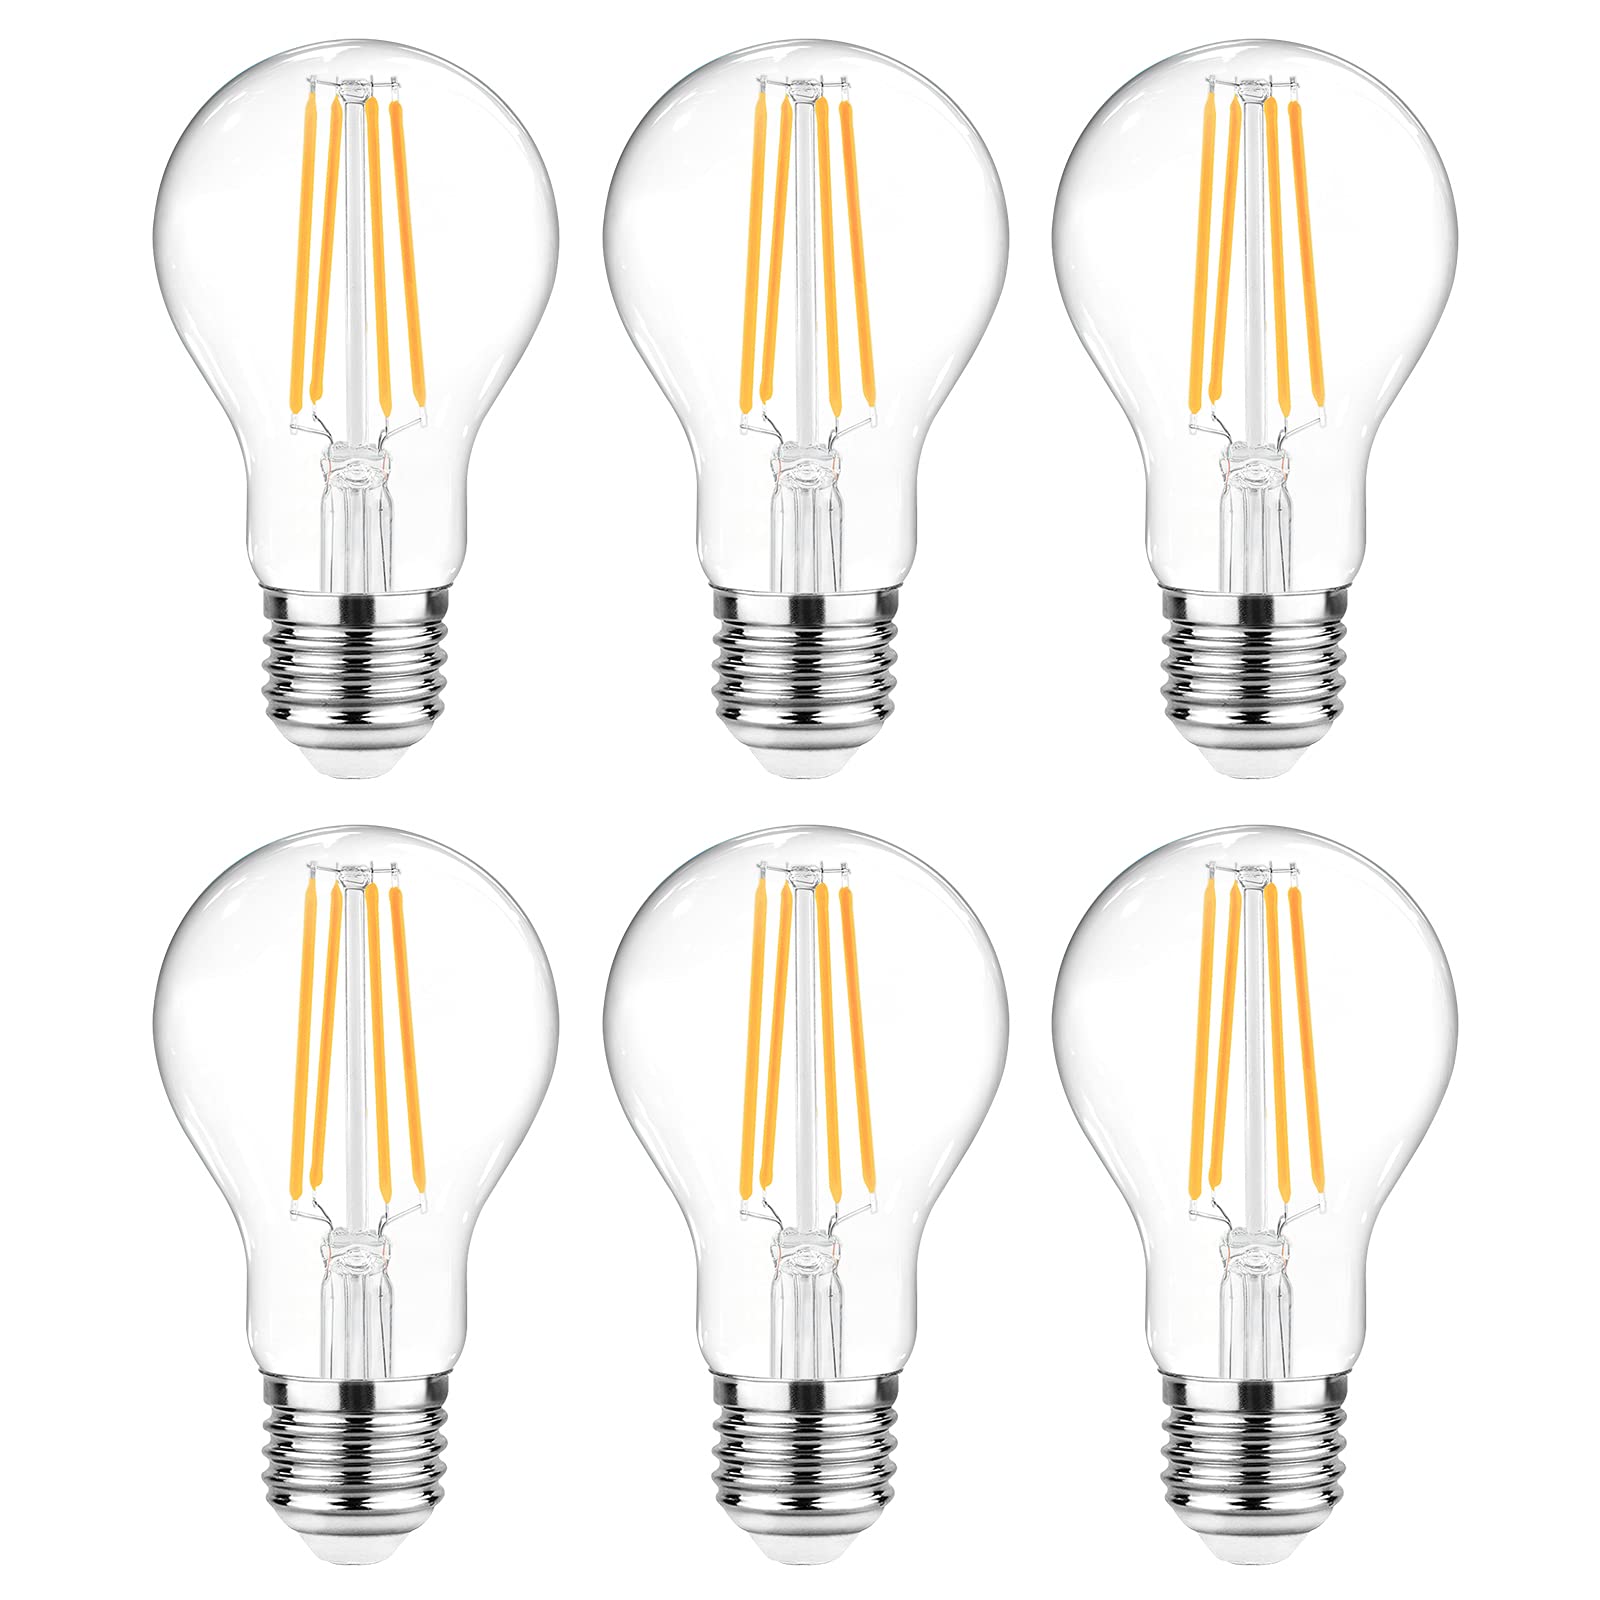 Ascher 60 Watt Equivalent, E26 LED Filament Light Bulbs, Warm White 2700K, Non-Dimmable, Classic Clear Glass, A19 LED Light Bulb with 80+ CRI, 6-Pack